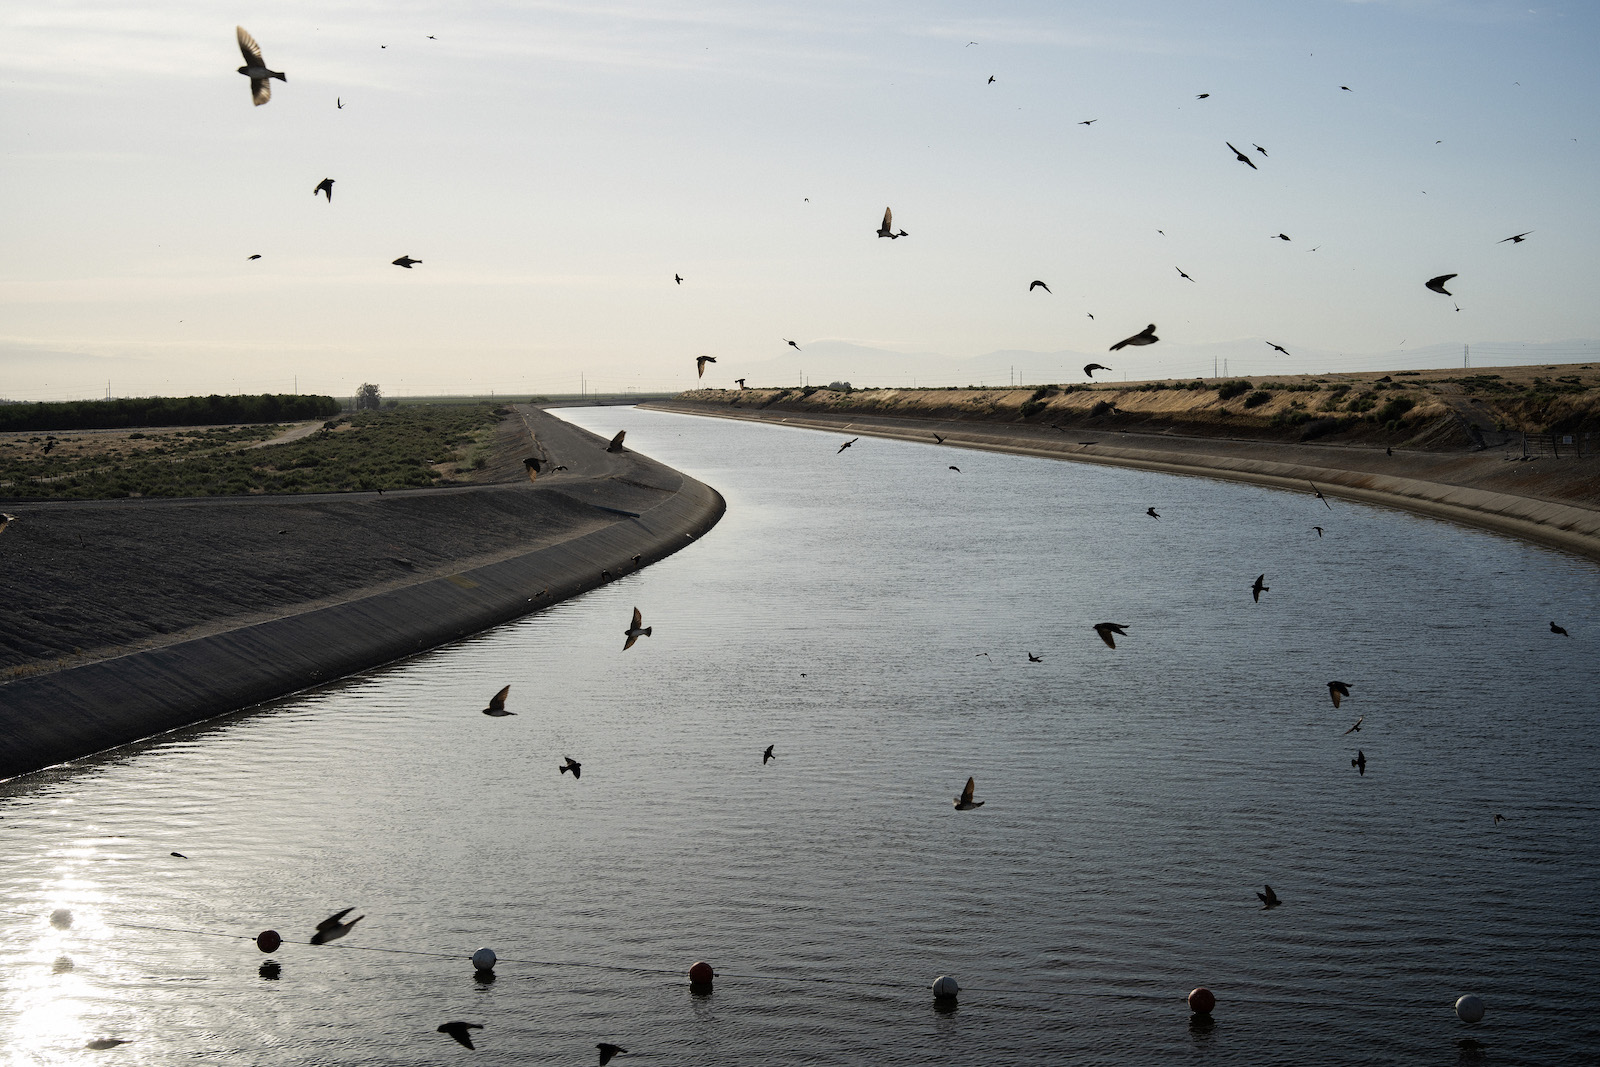 birds fly over a swath of water with land